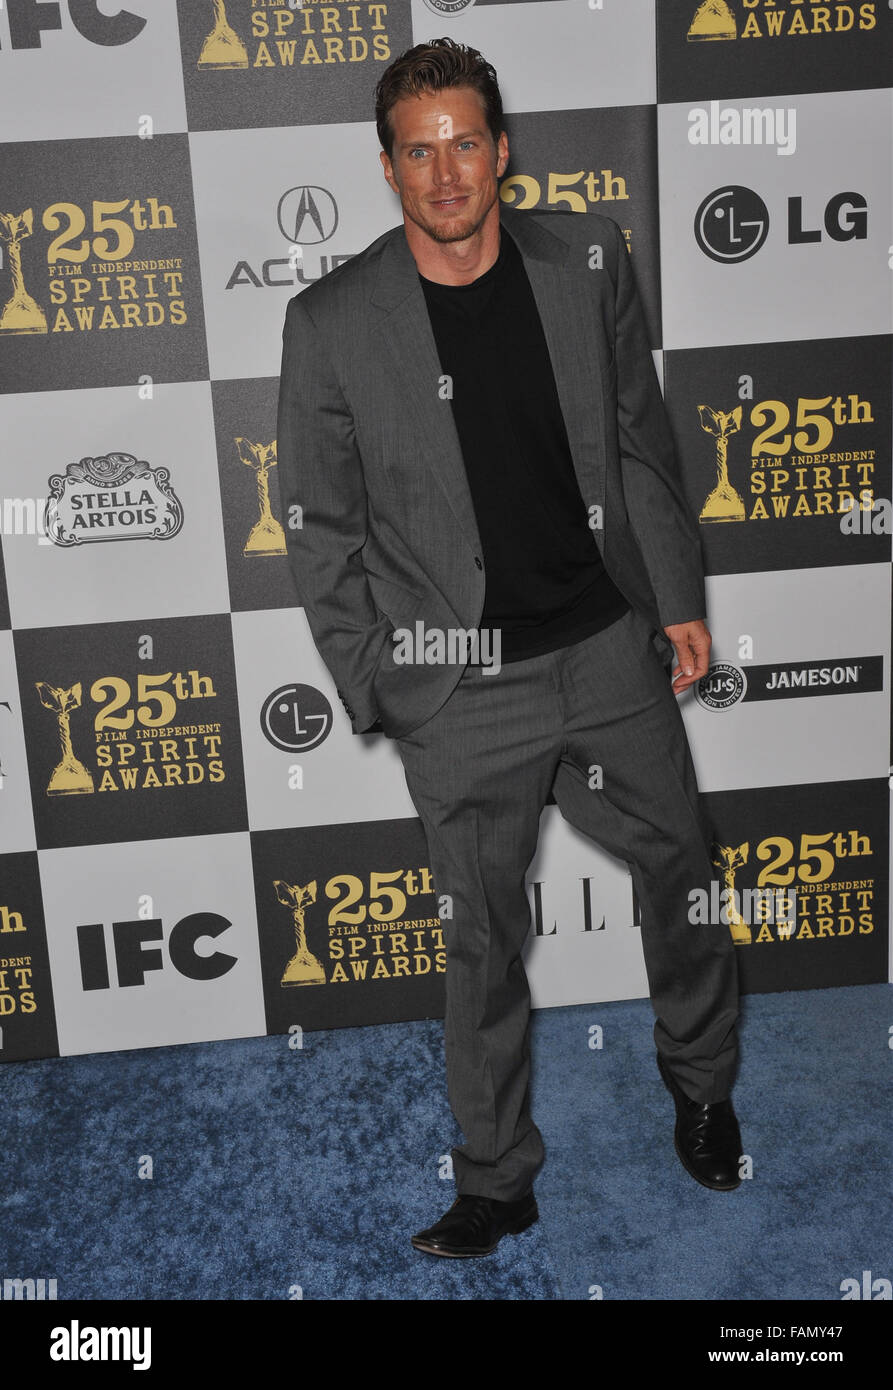 LOS ANGELES, CA - MARCH 5, 2010: Jason Lewis at the 25th Anniversary Film Independent Spirit Awards at the L.A. Live Event Deck in downtown Los Angeles. Stock Photo